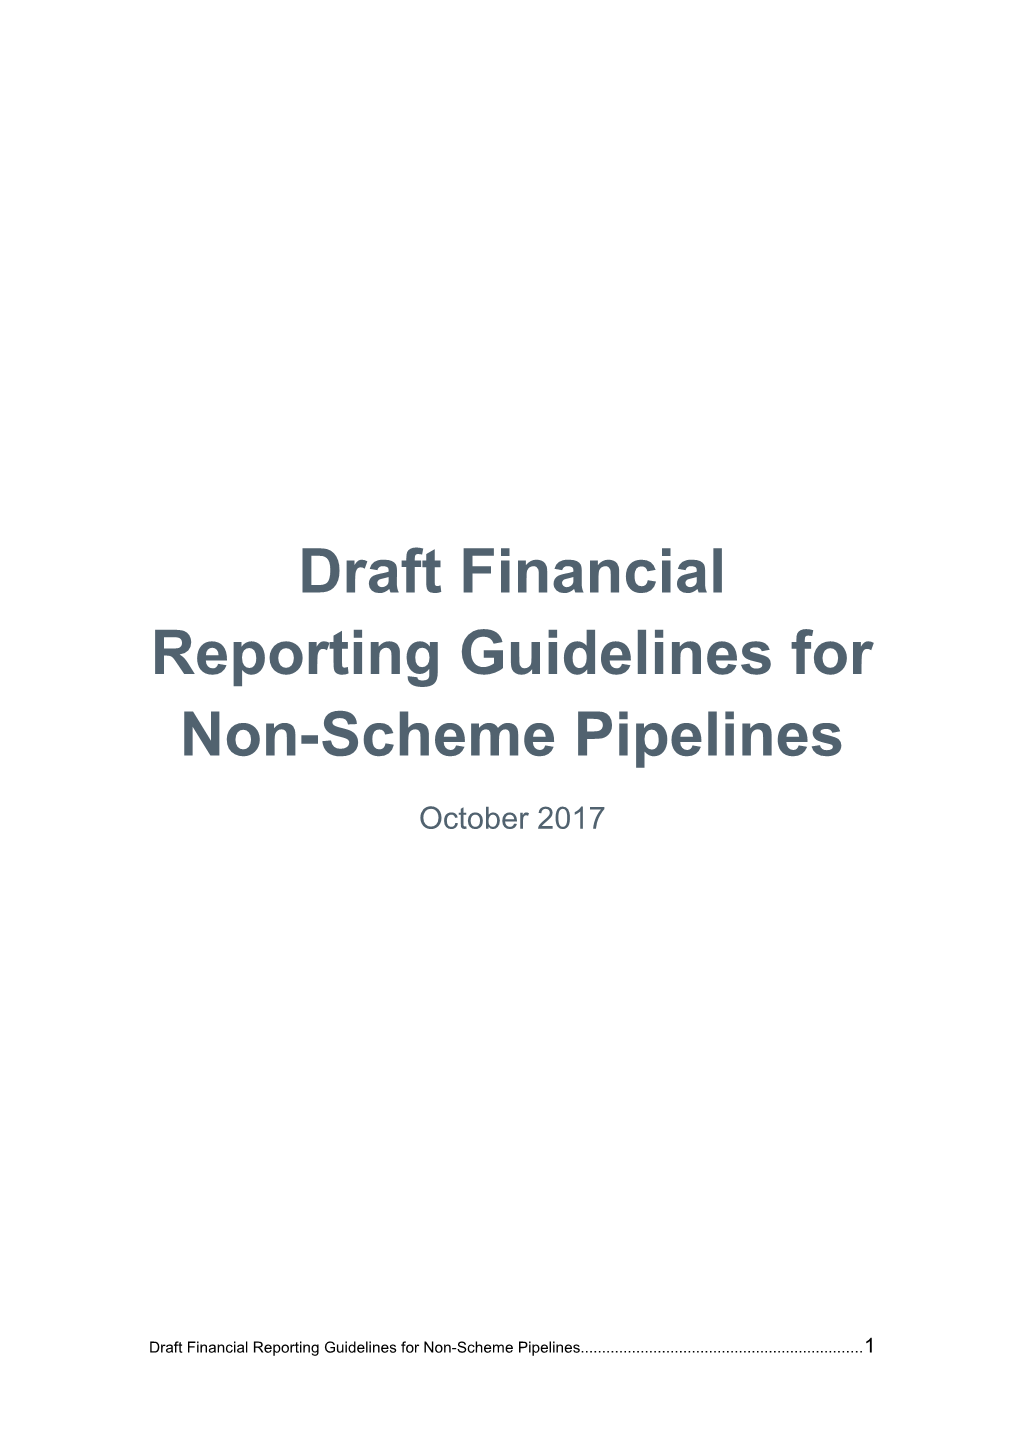 20171009 - Draft Financial Reporting Guidelines for Non-Scheme Pipelines